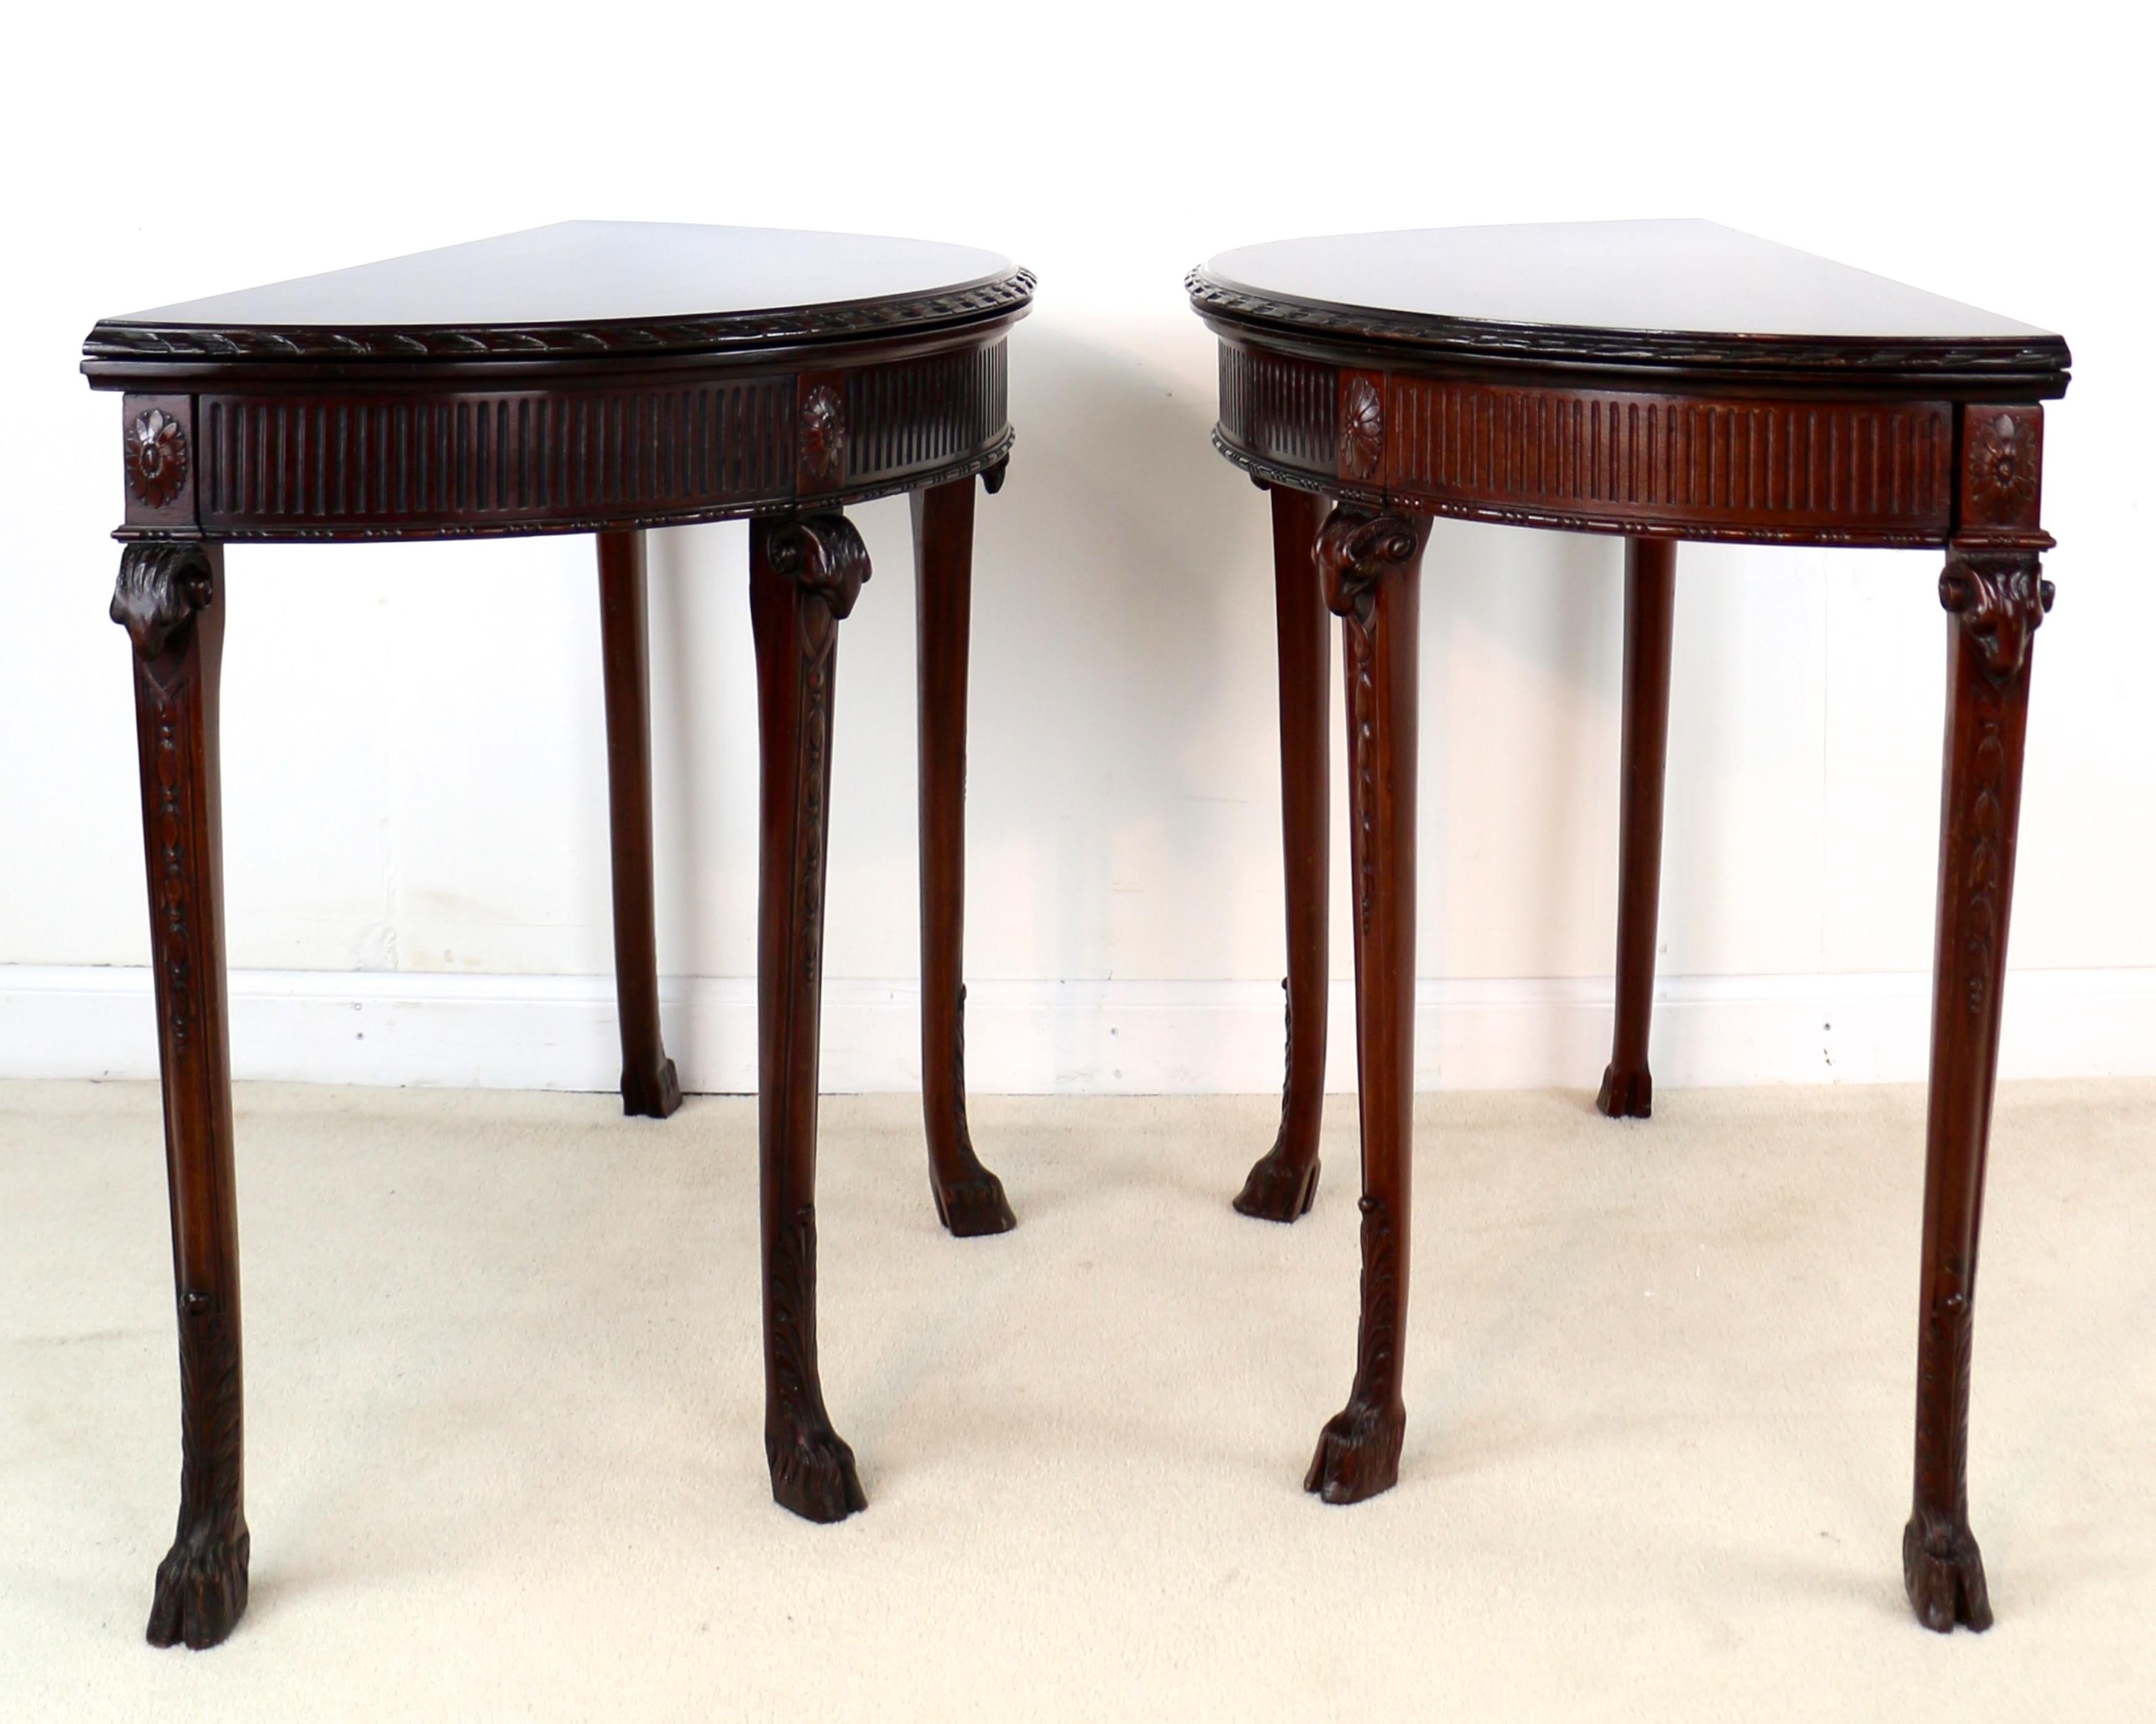 English Pair of George III Neoclassical Style Mahogany Demi-Lune Card Tables, circa 1900